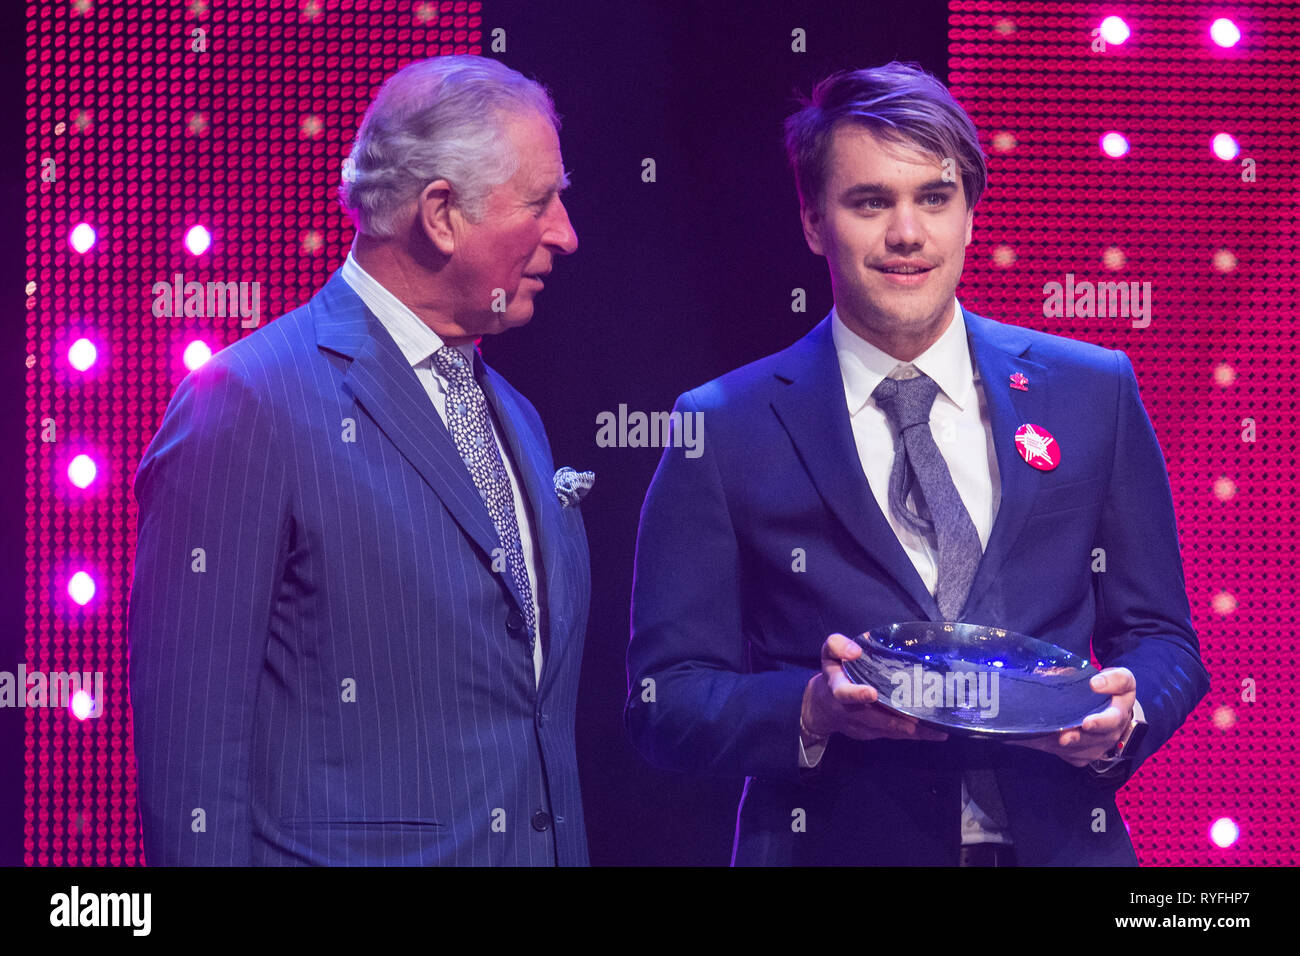 The Prince of Wales with winners of Mentor of the Year Award Rahul Mehra onstage at the annual Prince's Trust Awards at the London Palladium. Stock Photo